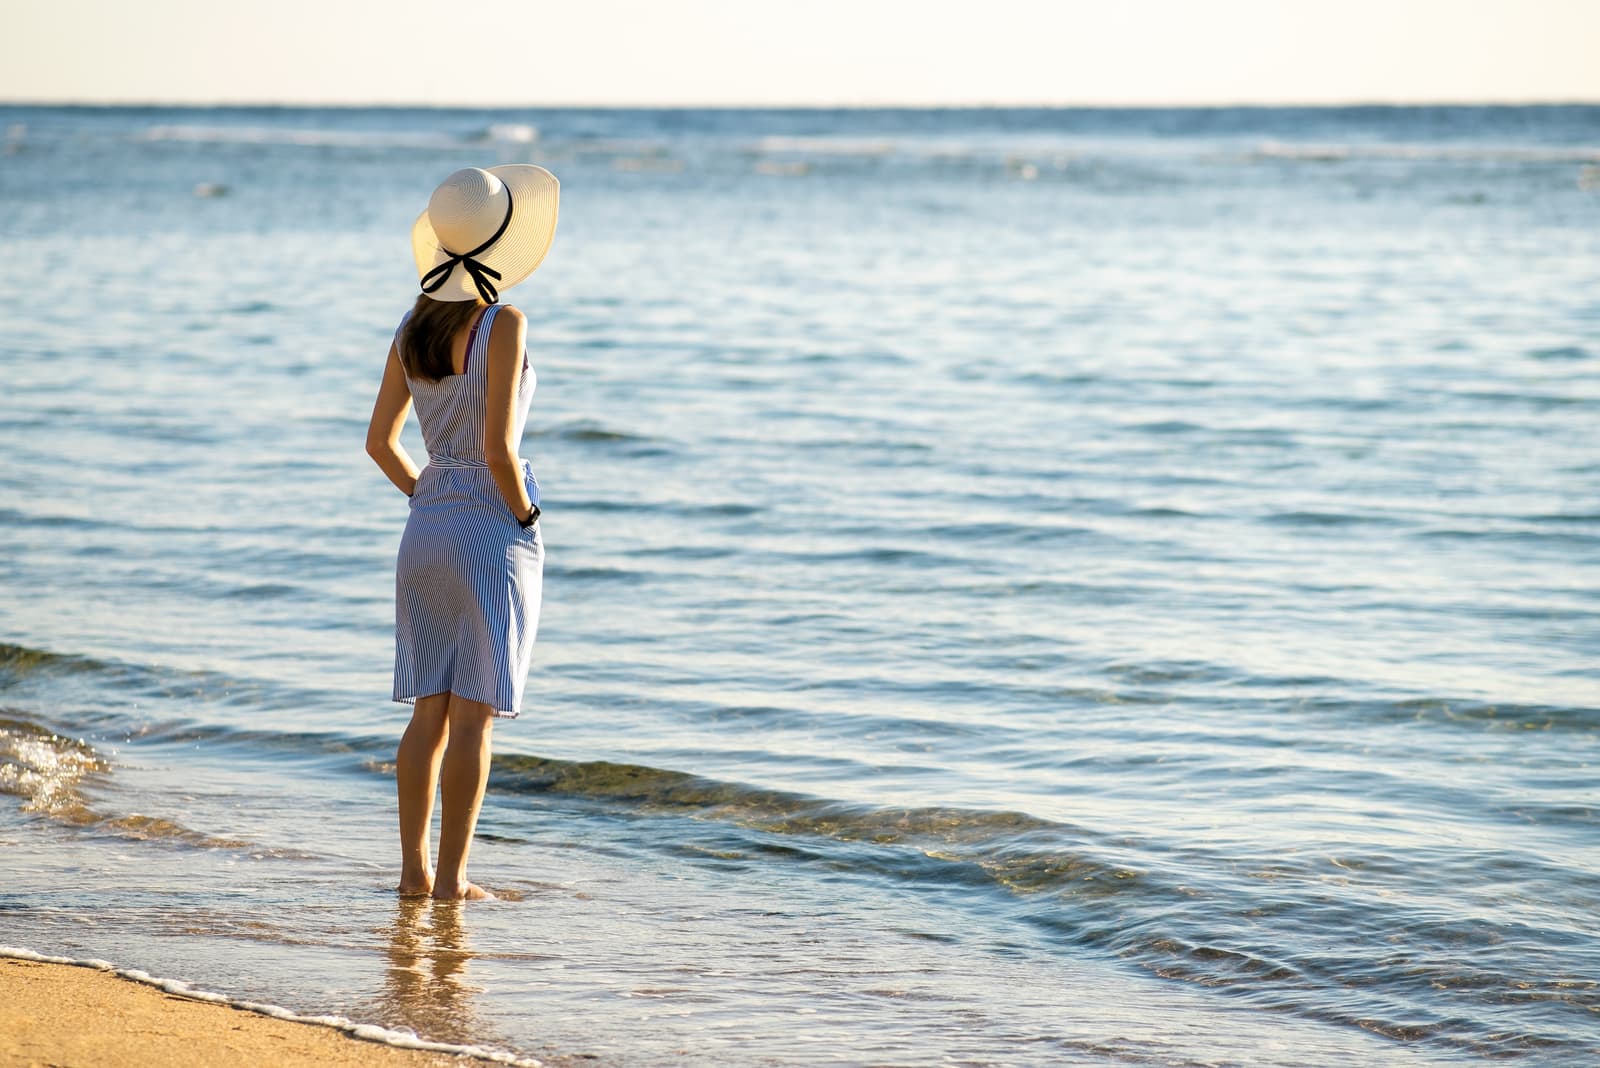  woman in straw hat and a dress standing alone on empty sand beach